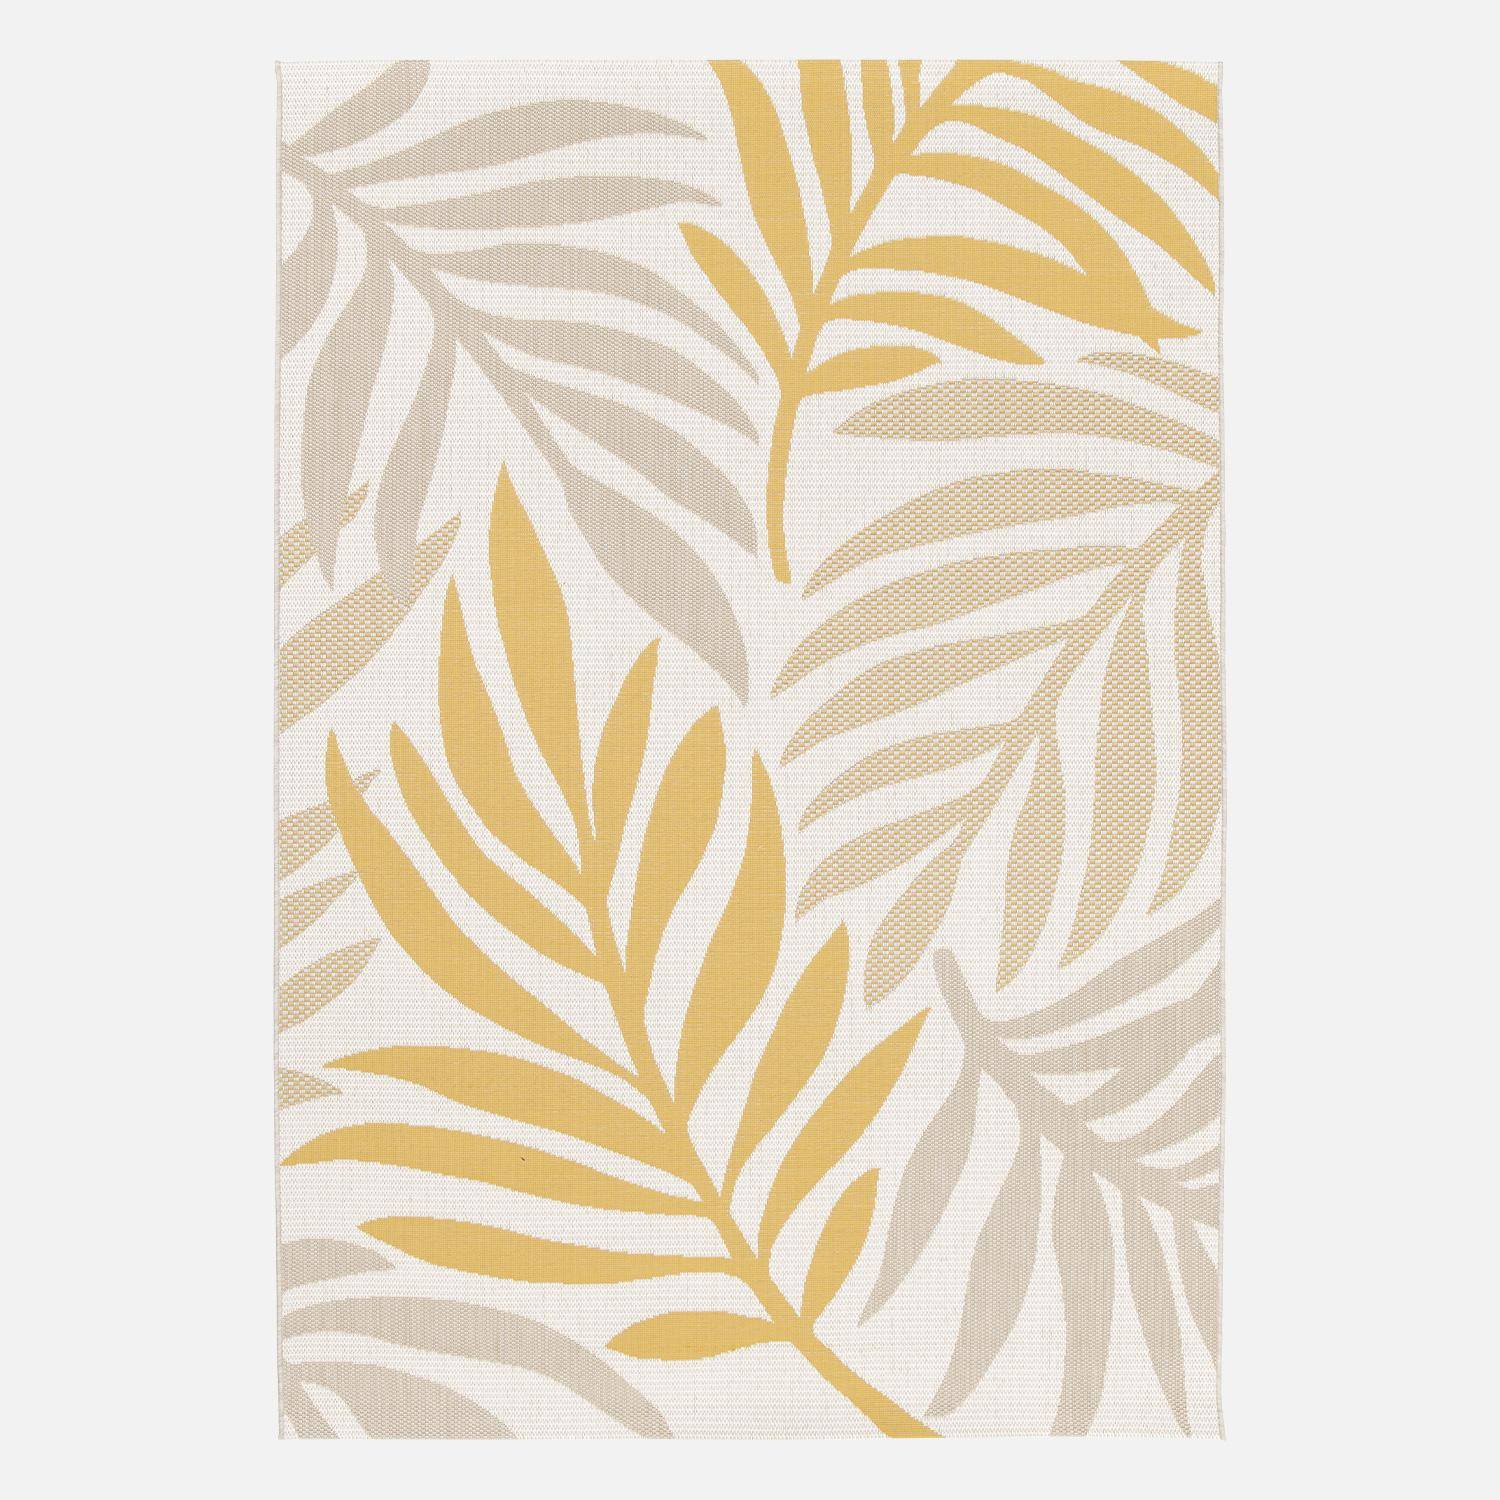 Indoor/outdoor carpet with beige and mustard plant pattern, recycled polyester, Bloom, 120 x 170 cm Photo2